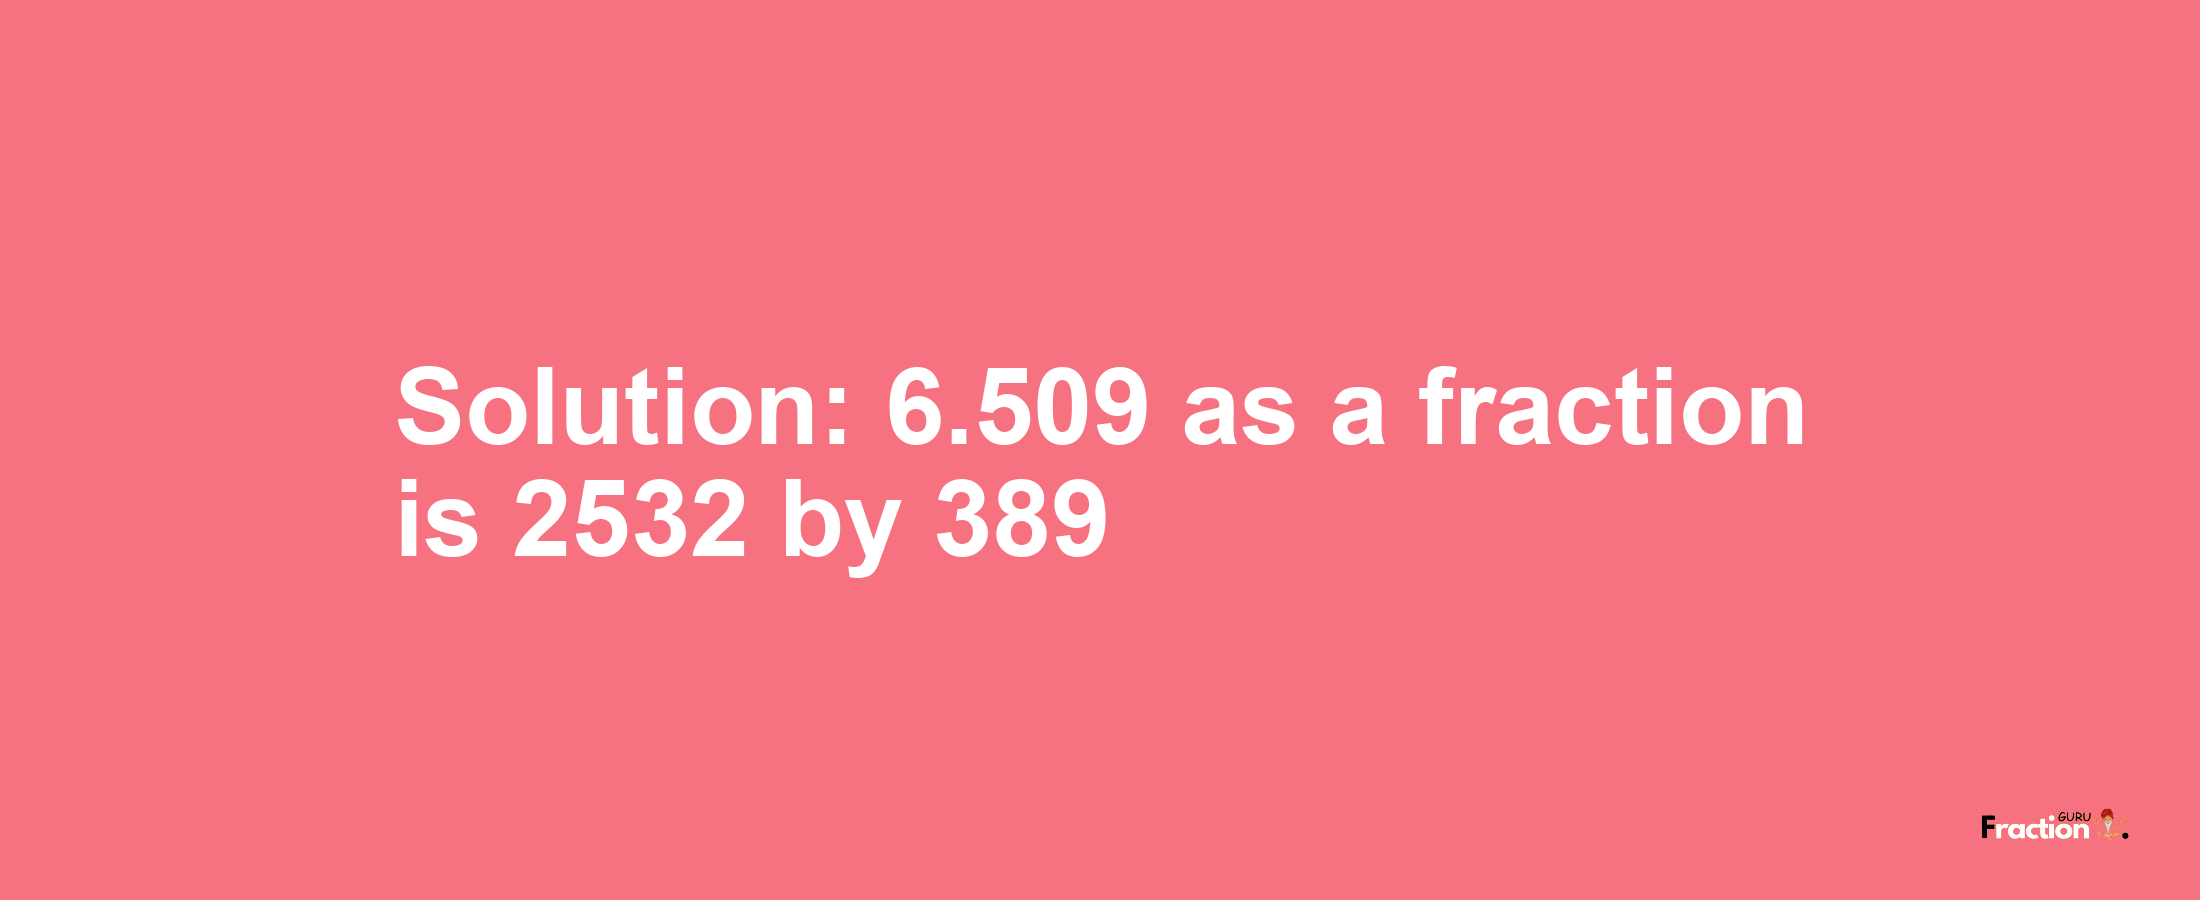 Solution:6.509 as a fraction is 2532/389